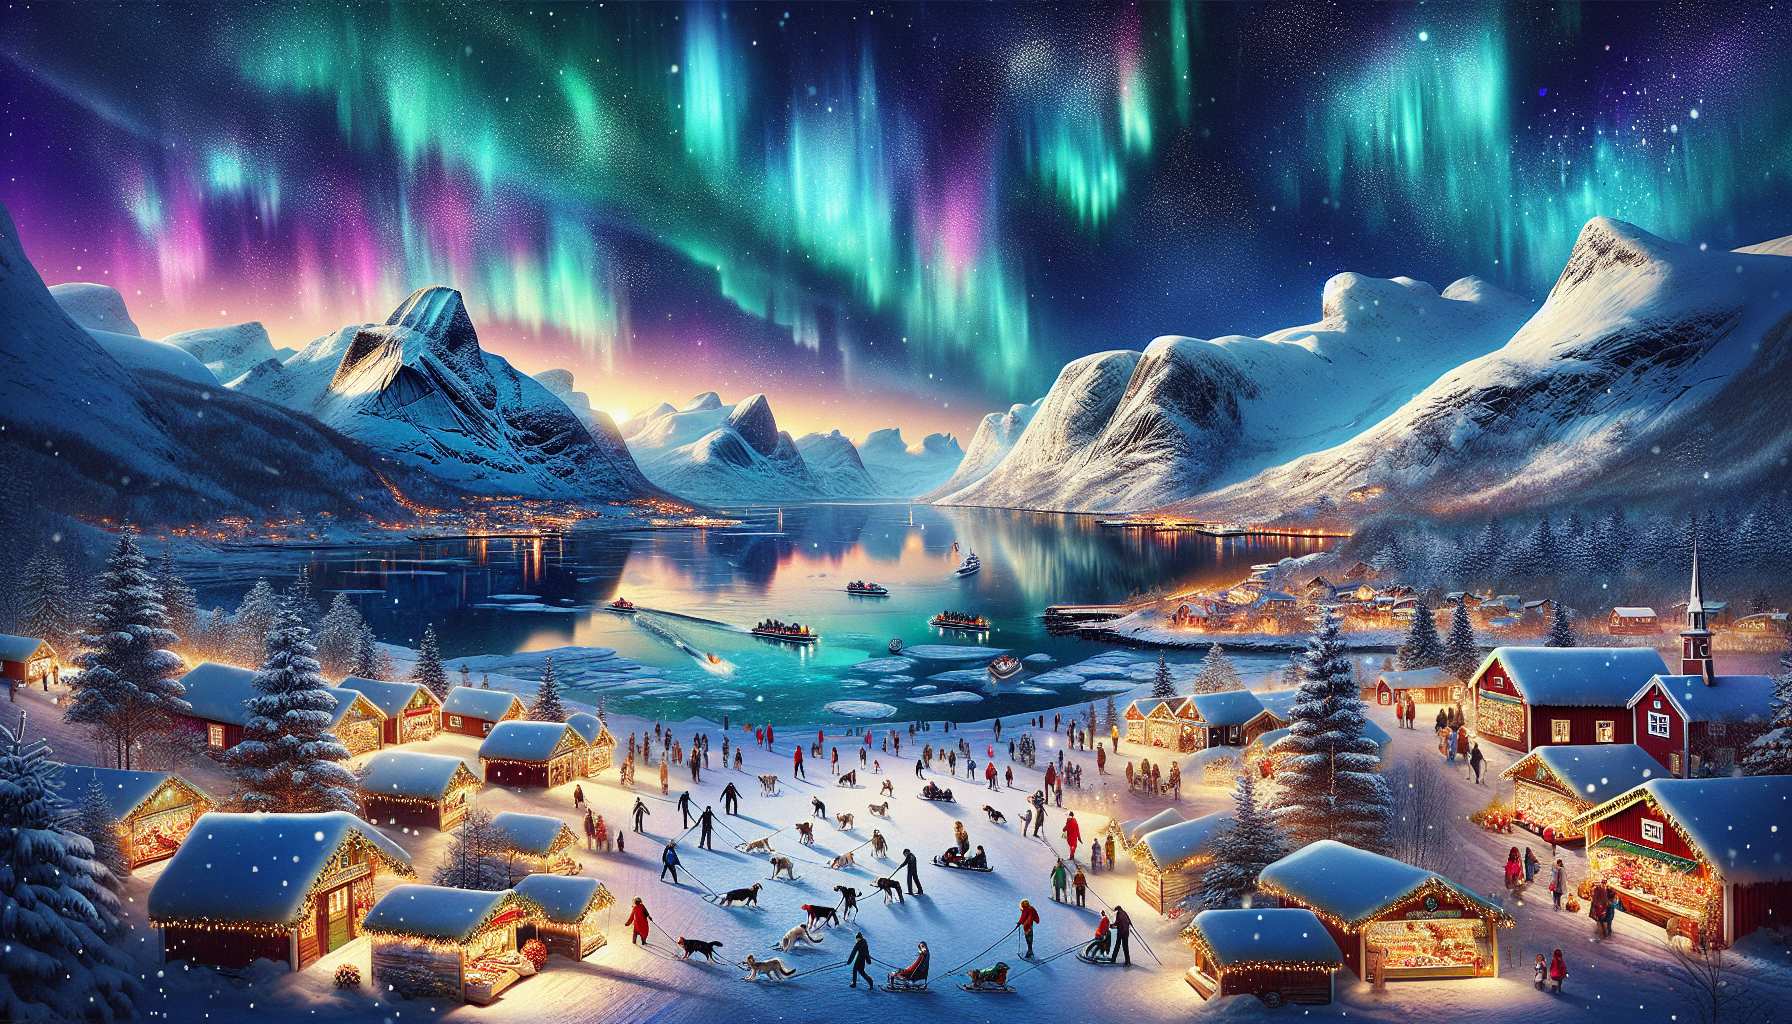 Norway December weather, Northern Lights, Christmas markets